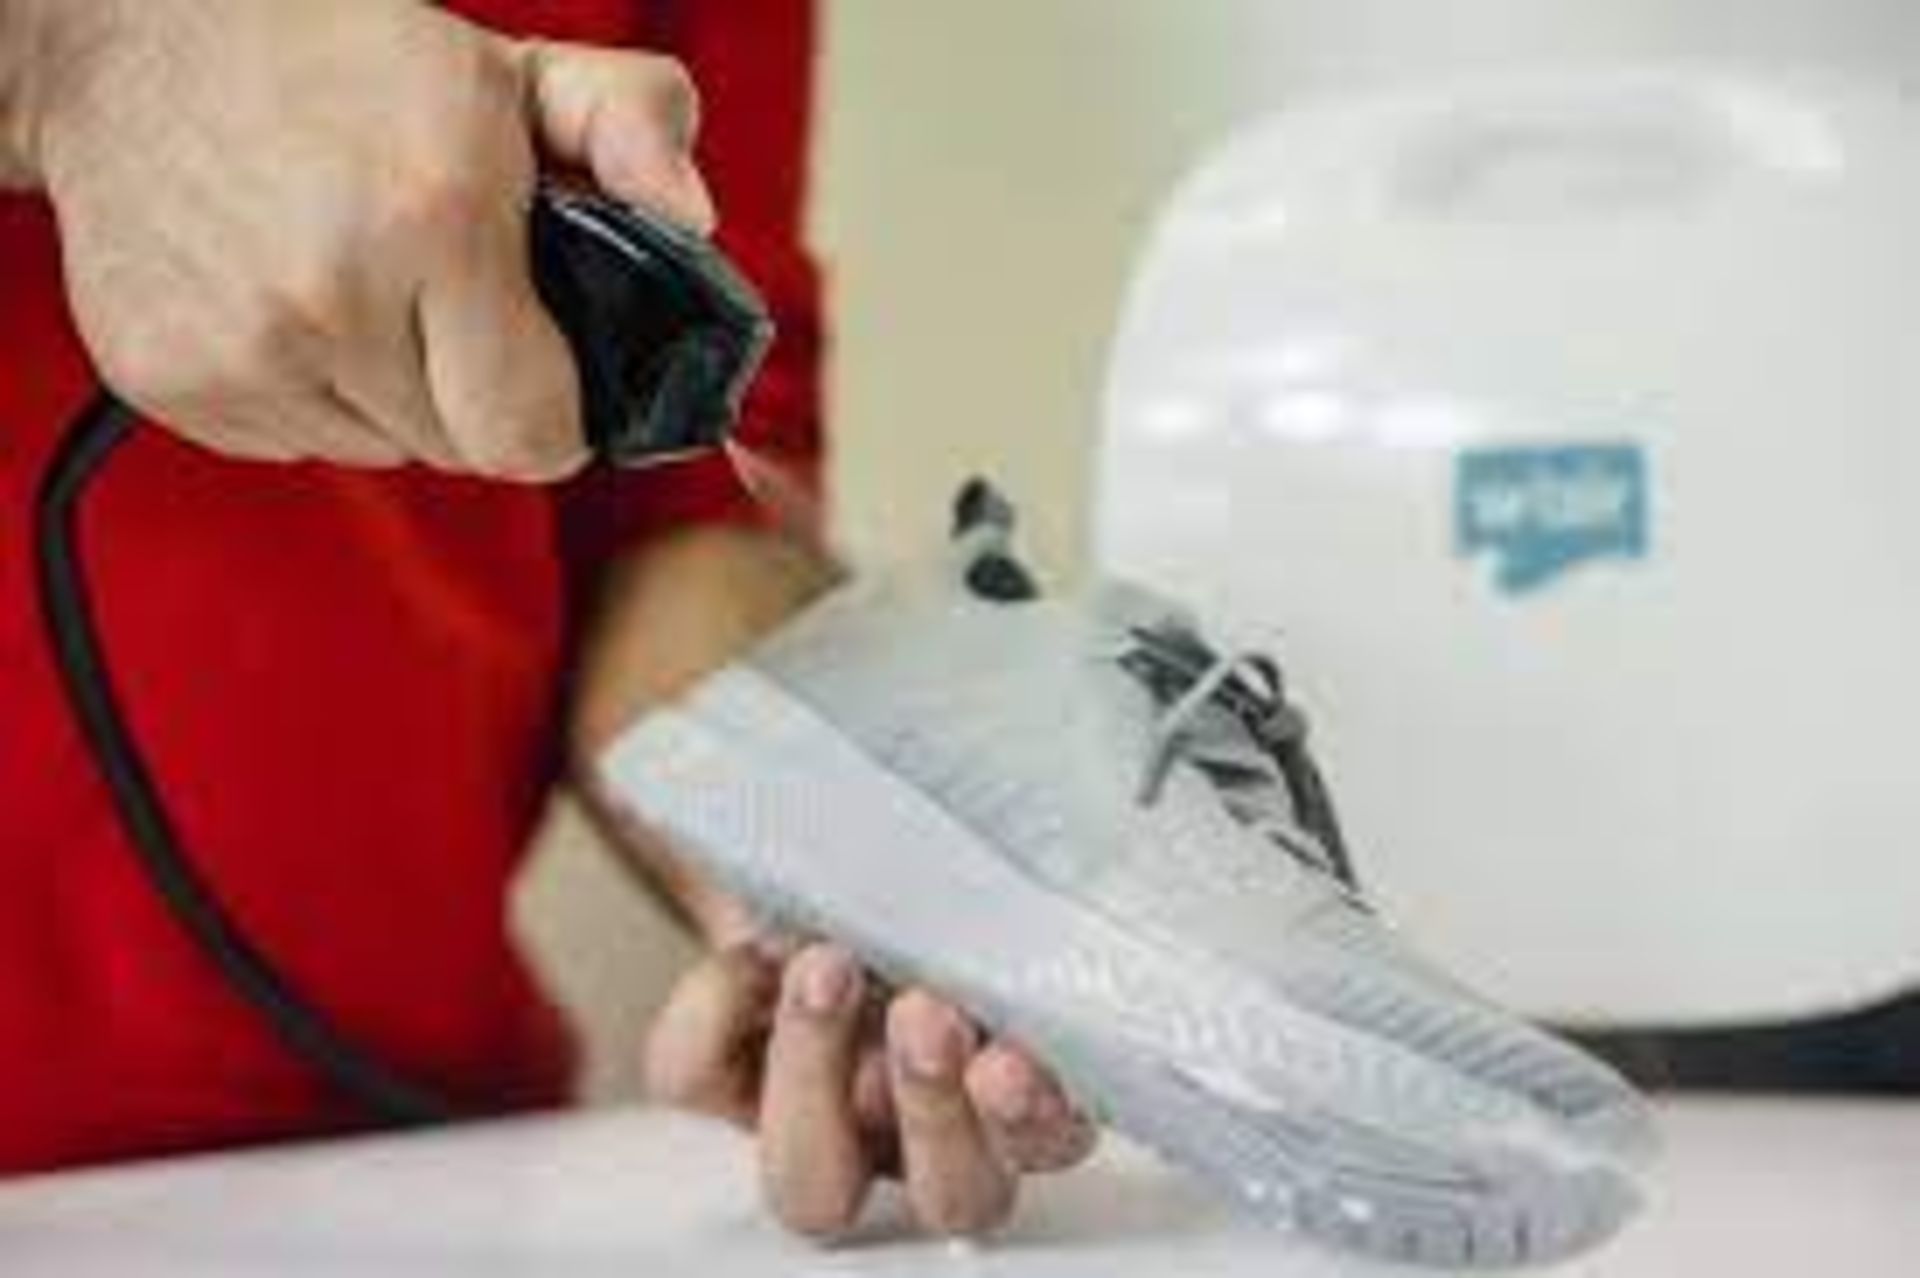 BRAND NEW W'AIR SNEAKER CLEANING SYSTEMS RRP £299 The w'air uses hydrodynamic technology producing a - Image 4 of 6